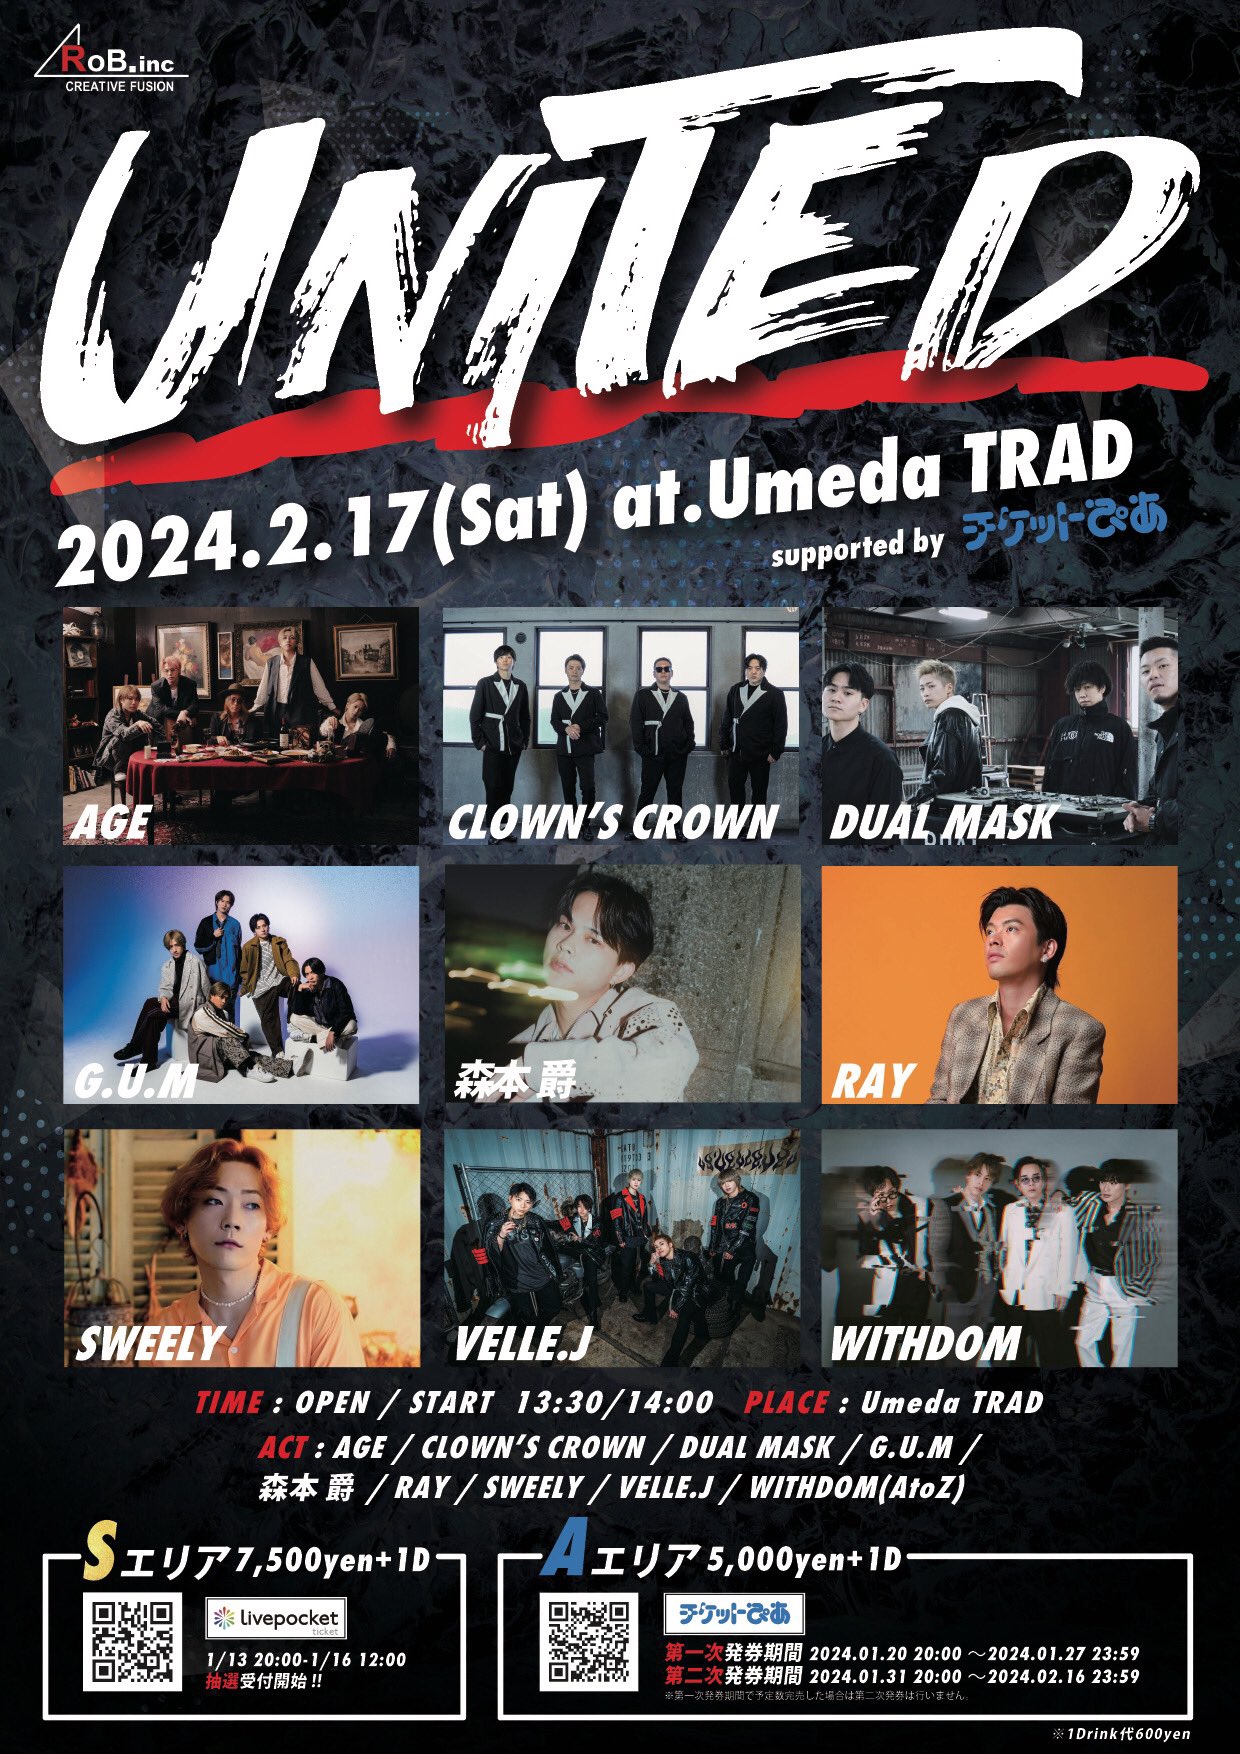 LIVE：2/17(土) 「UNITED supported by チケットぴあ」@ Umeda TRAD 